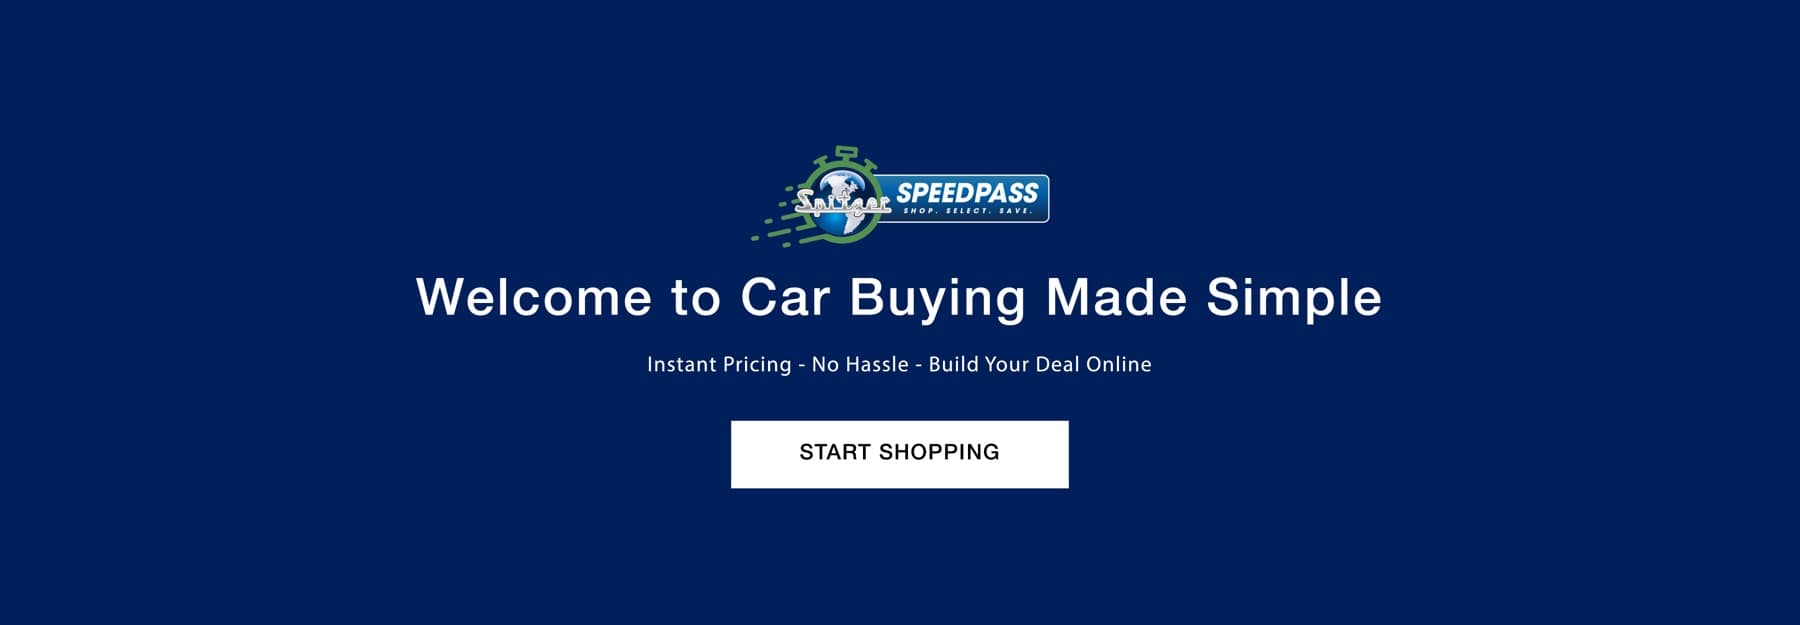 Welcome to car buying made simple